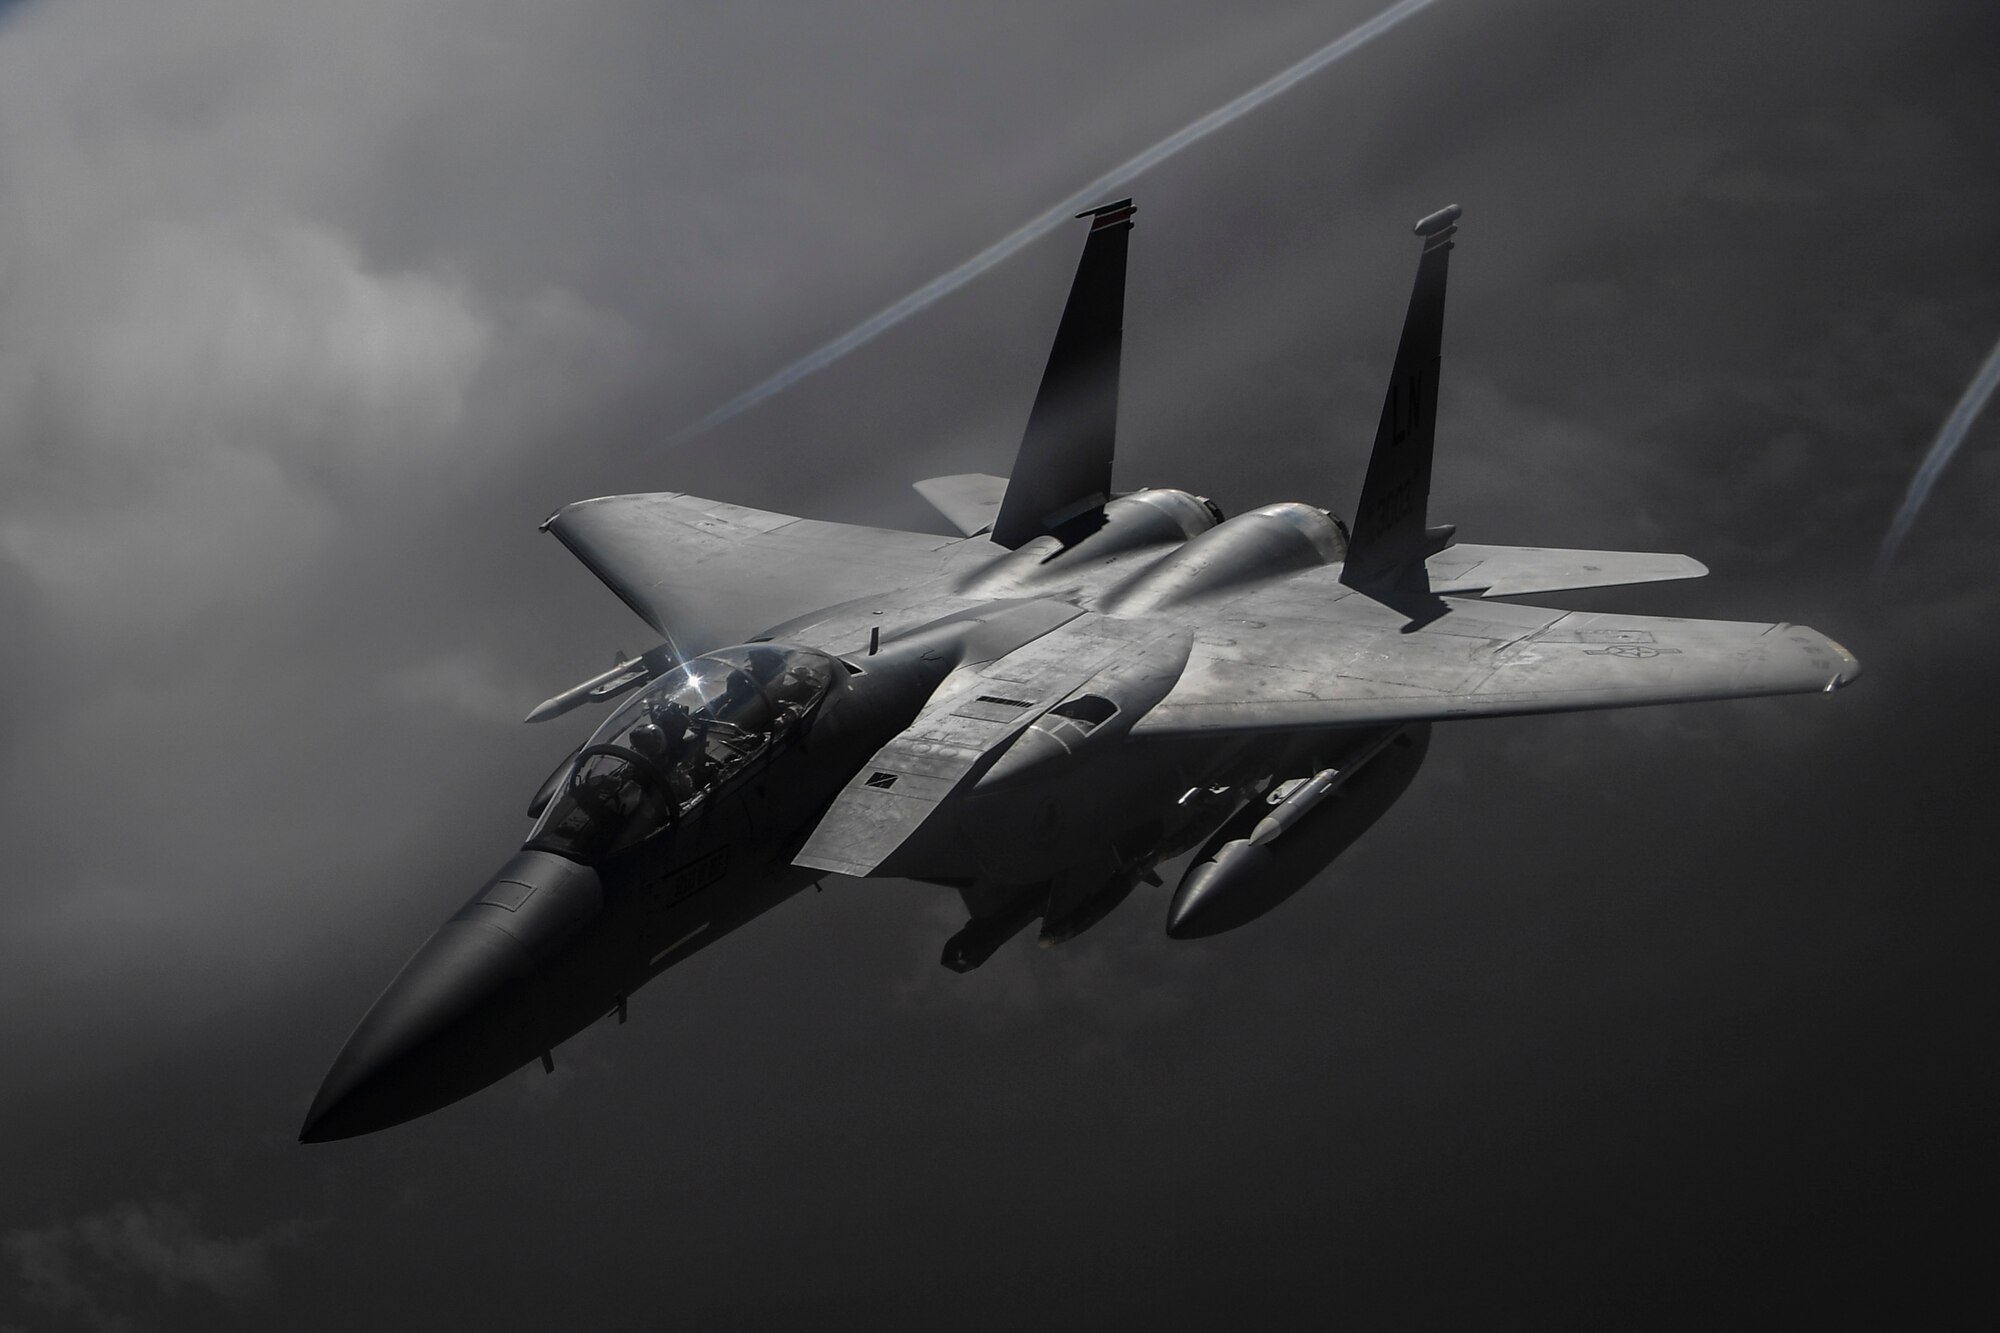 A U.S. Air Force F-15E Strike Eagle flies over Iraq on May 5, 2018. The F-15E is a dual-role fighter designed to perform air-to-air and air-to-ground missions. An array of avionics and electronics systems gives the F-15E the capability to fight at low altitude, day or night, and in all weather. (U.S. Air Force photo by Staff Sgt. Corey Hook)